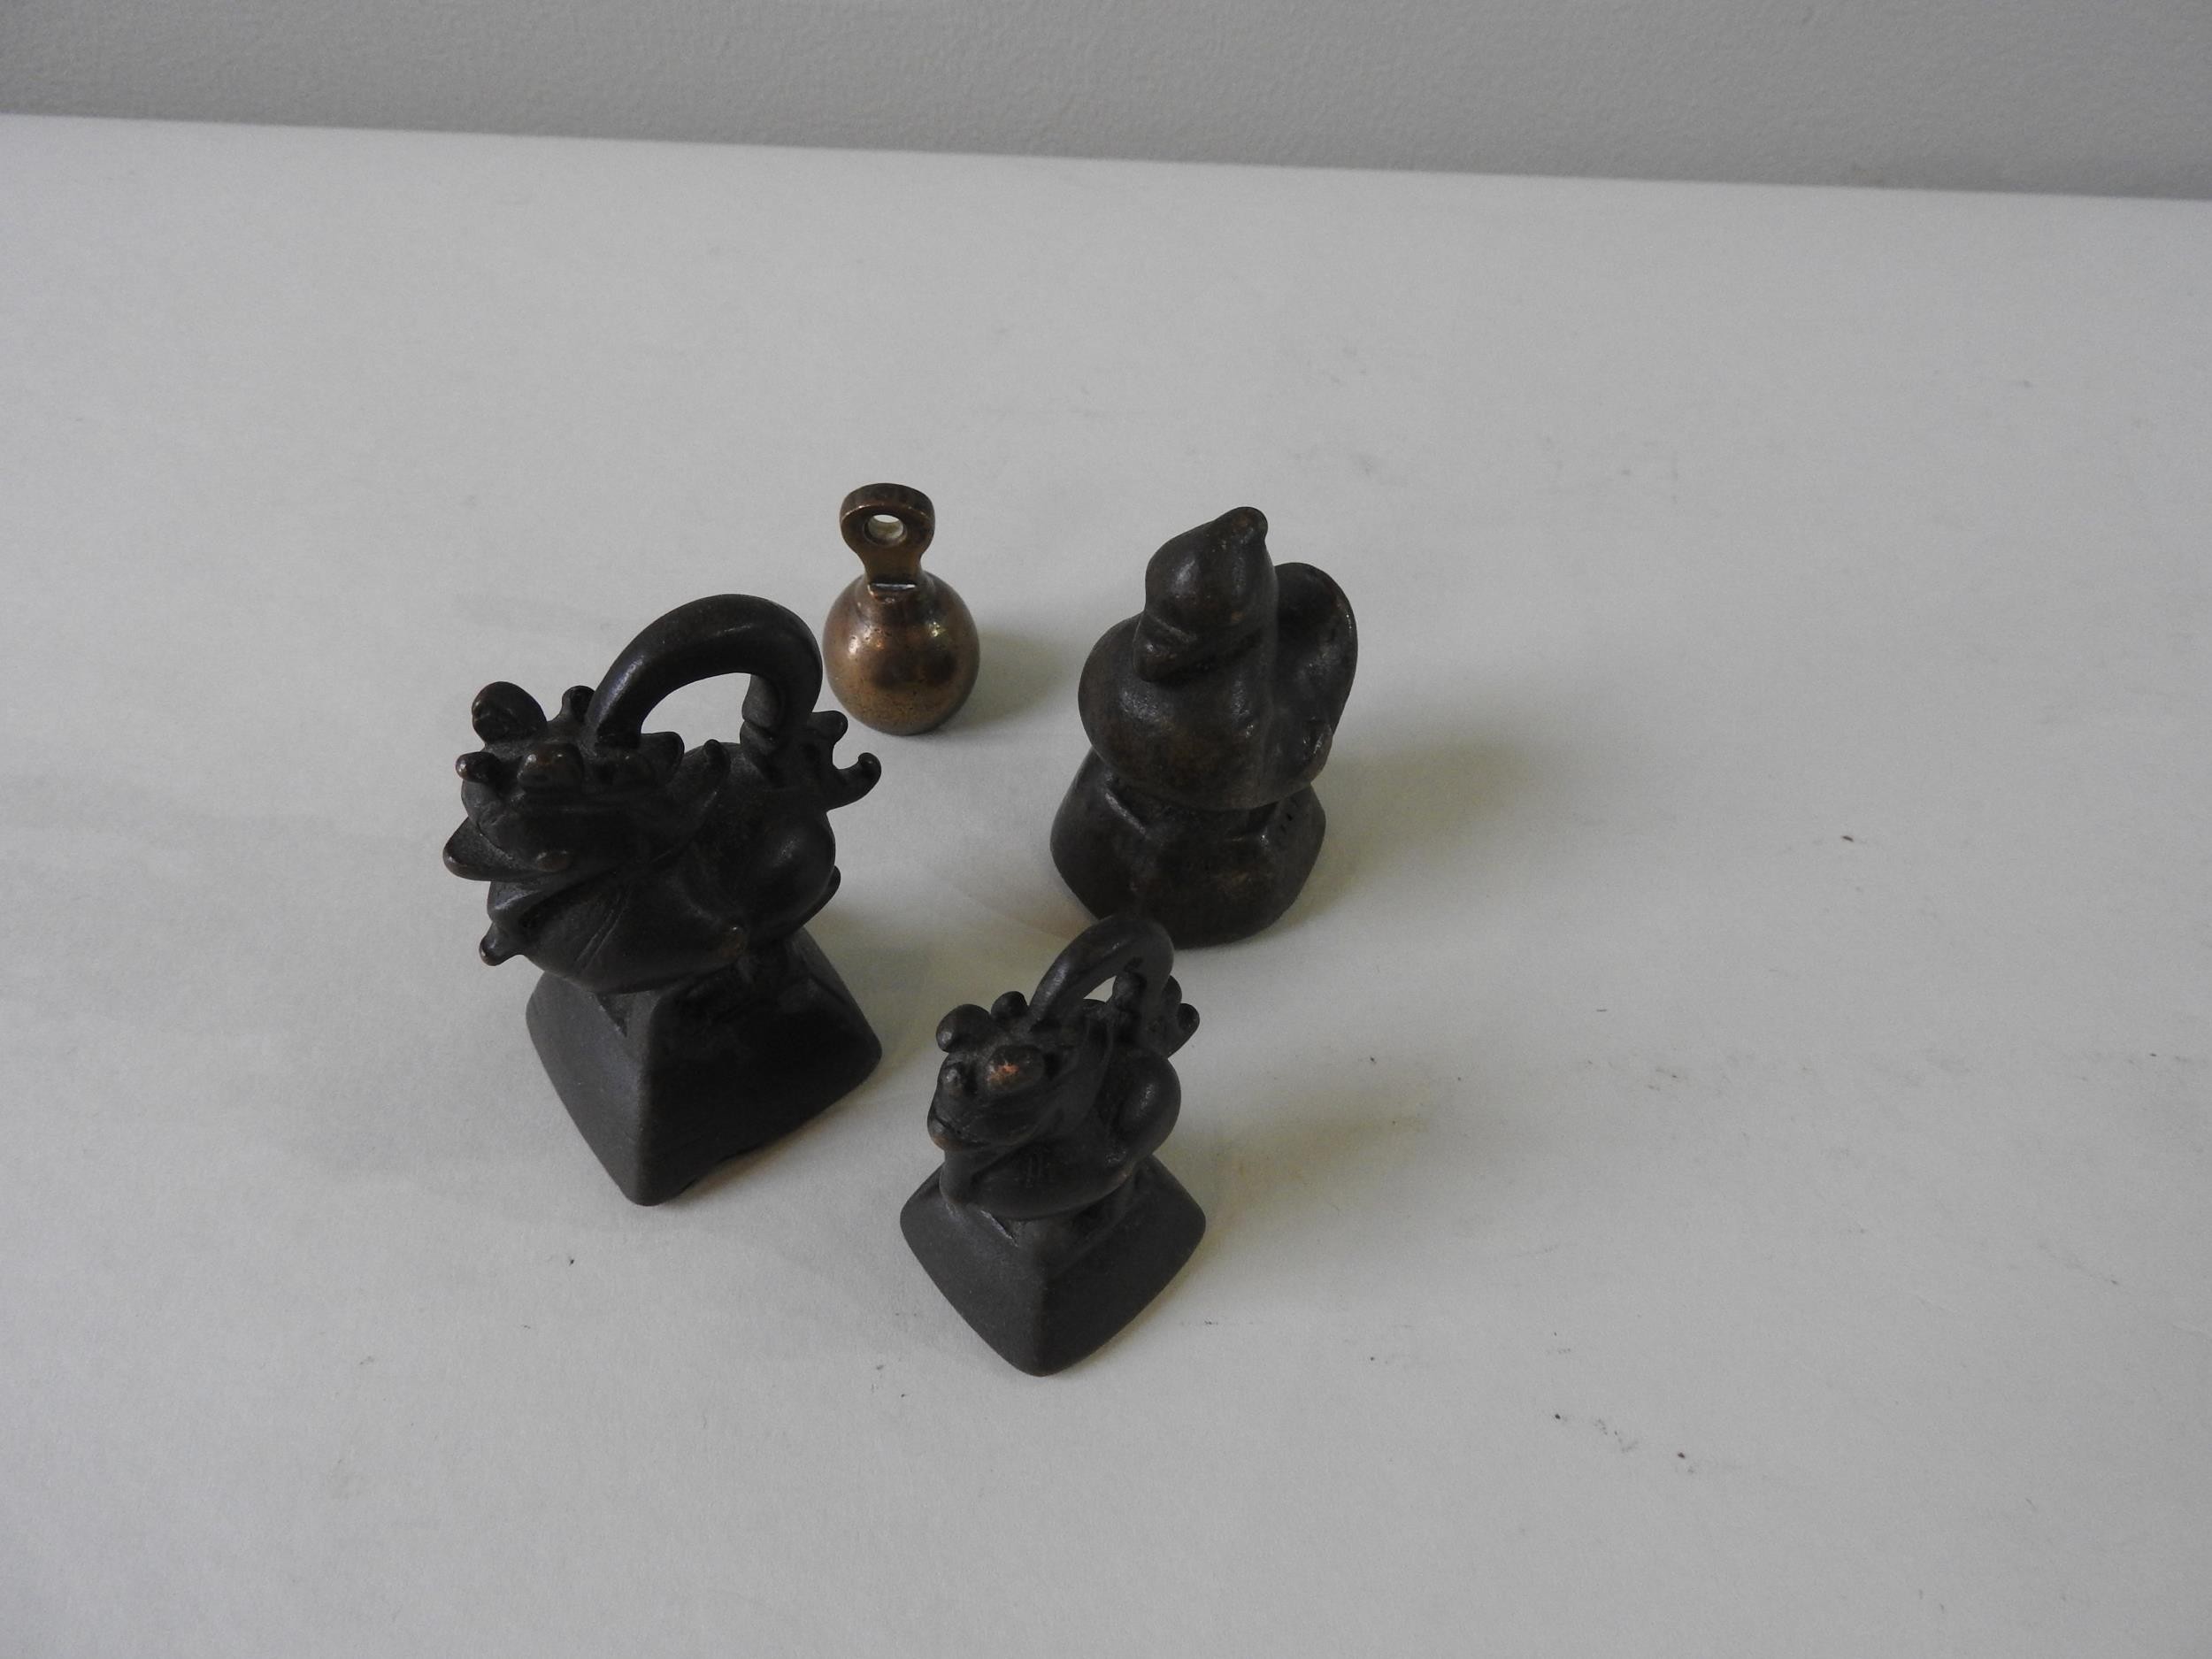 THREE ASHANTI BRONZE OPIUM OR GOLD WEIGHTS in the form of a duck and two stylised creatures, 7cm max - Image 5 of 6